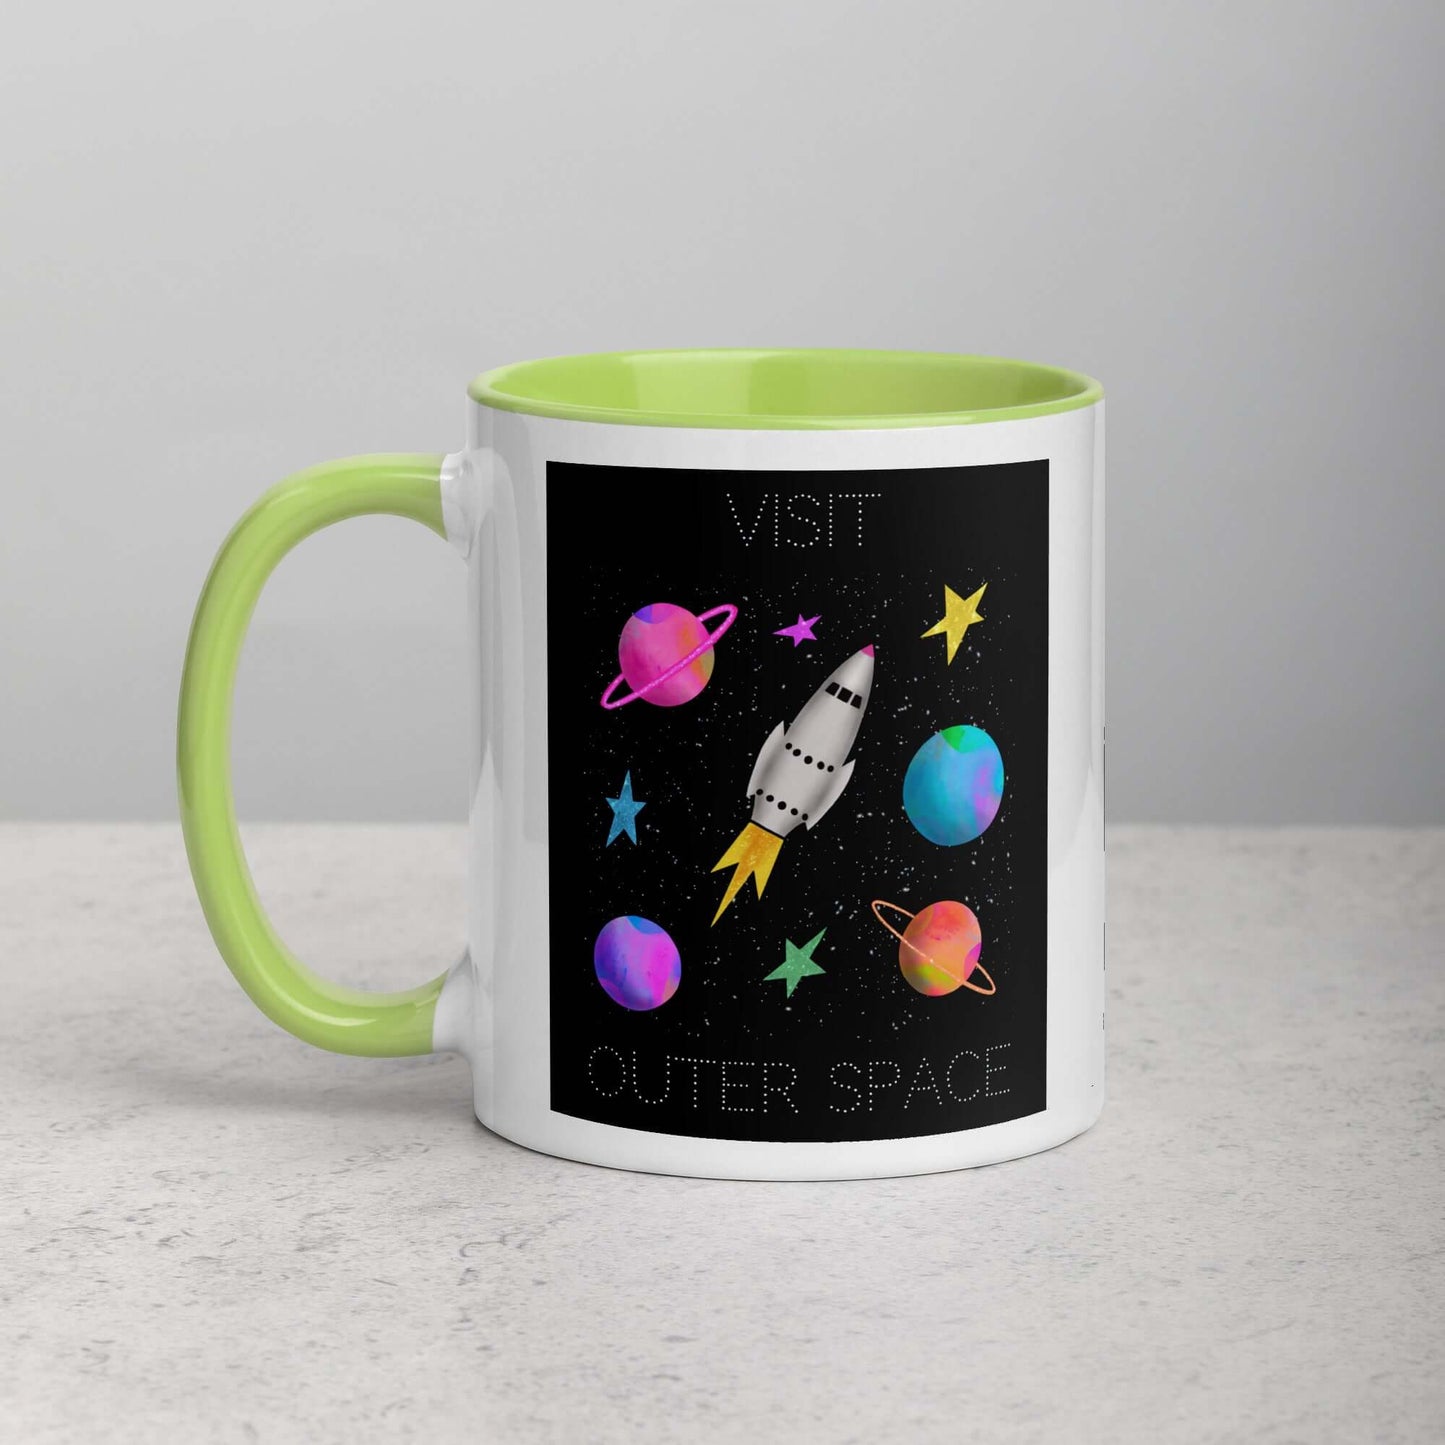 Whimsical Space Rocket with Colorful Planets and Stars on Black Background with Text “Visit Outer Space” Mug with Lime Green Color Inside Left Handed Front View